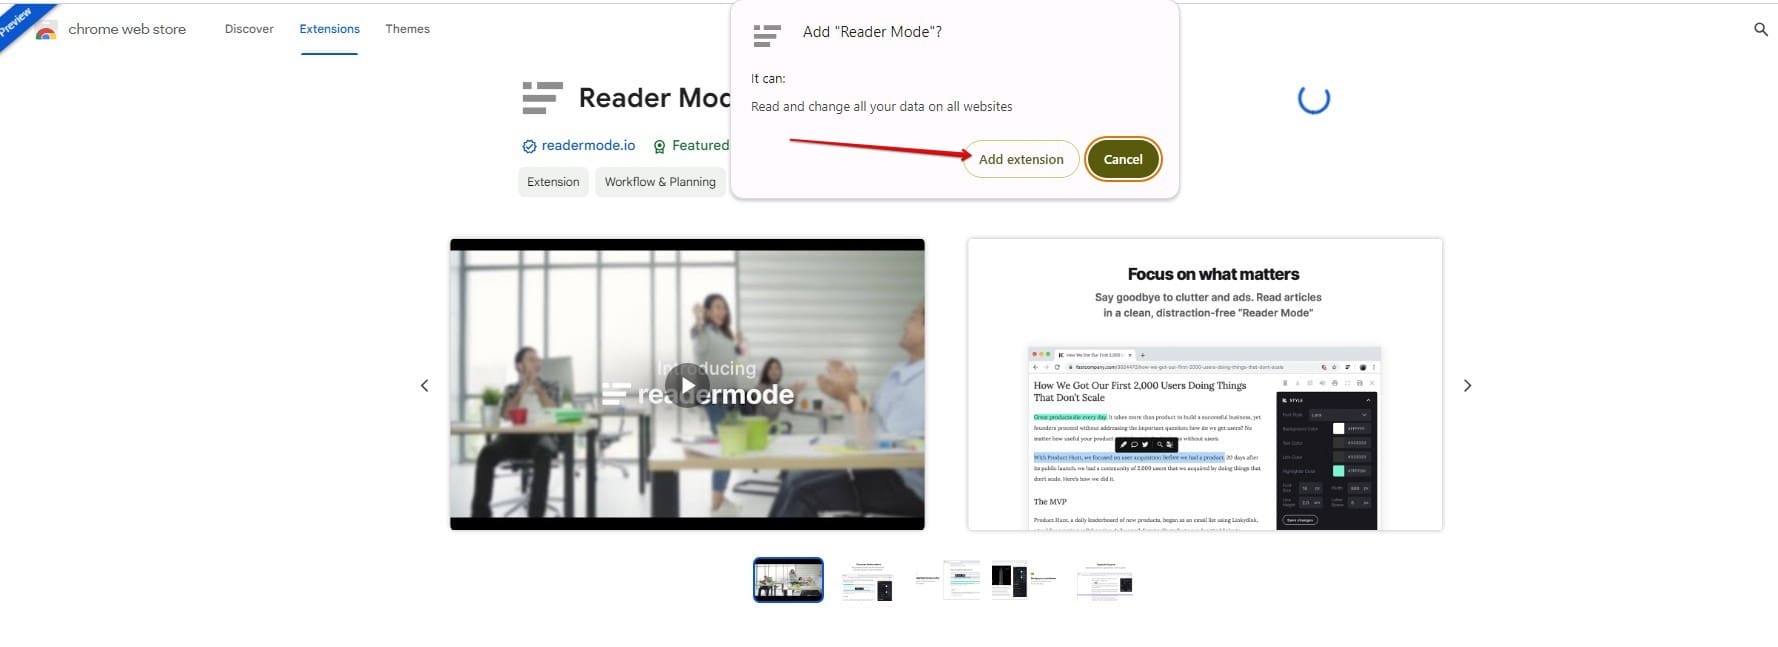 Confirming the installation of Reader Mode